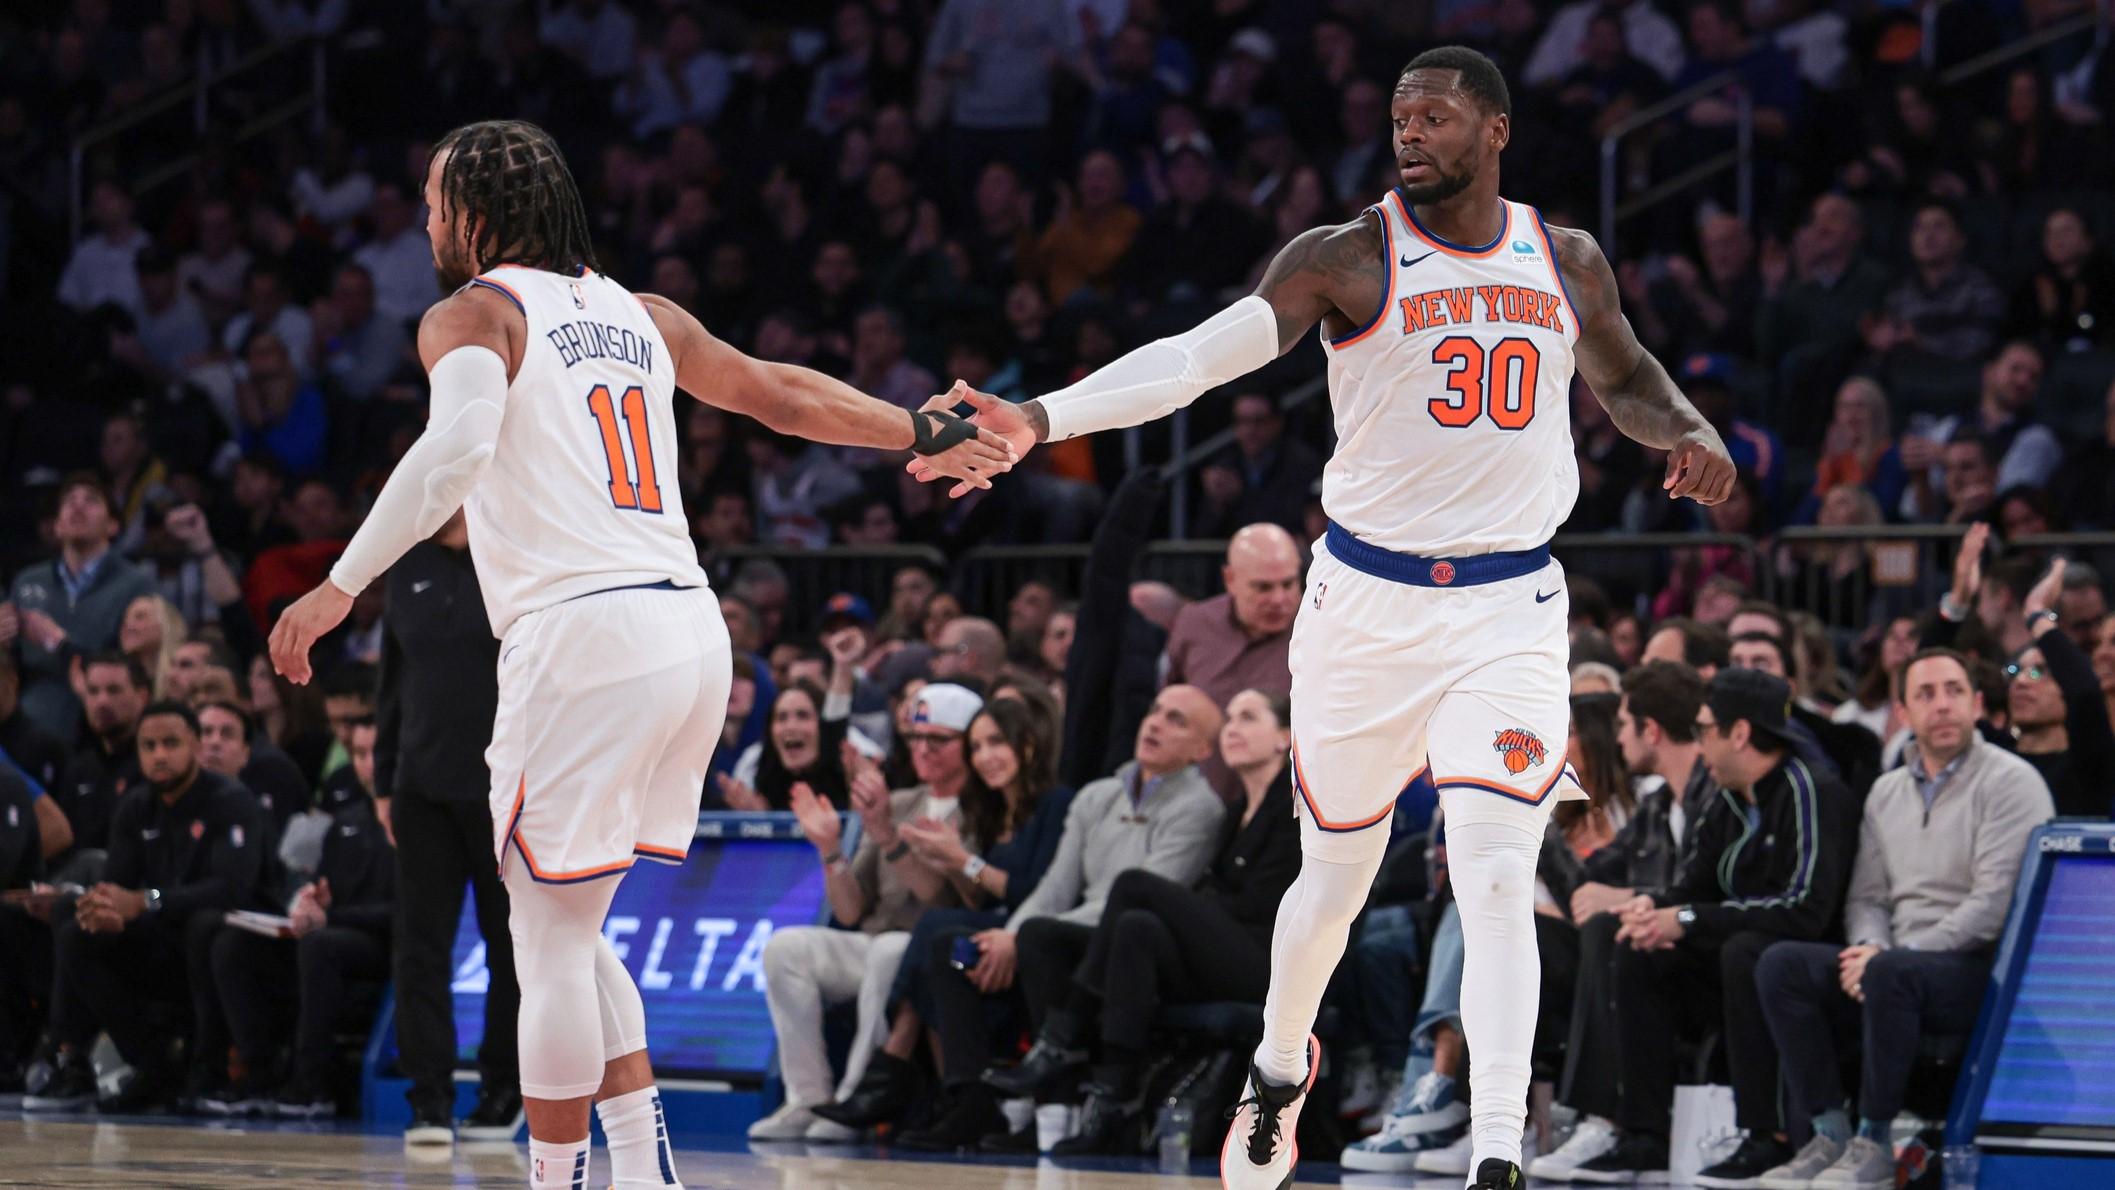 Nov 30, 2023; New York, New York, USA; New York Knicks forward Julius Randle (30) slaps hands with guard Jalen Brunson (11) after a basket during the second half against the Detroit Pistons at Madison Square Garden. / Vincent Carchietta-USA TODAY Sports